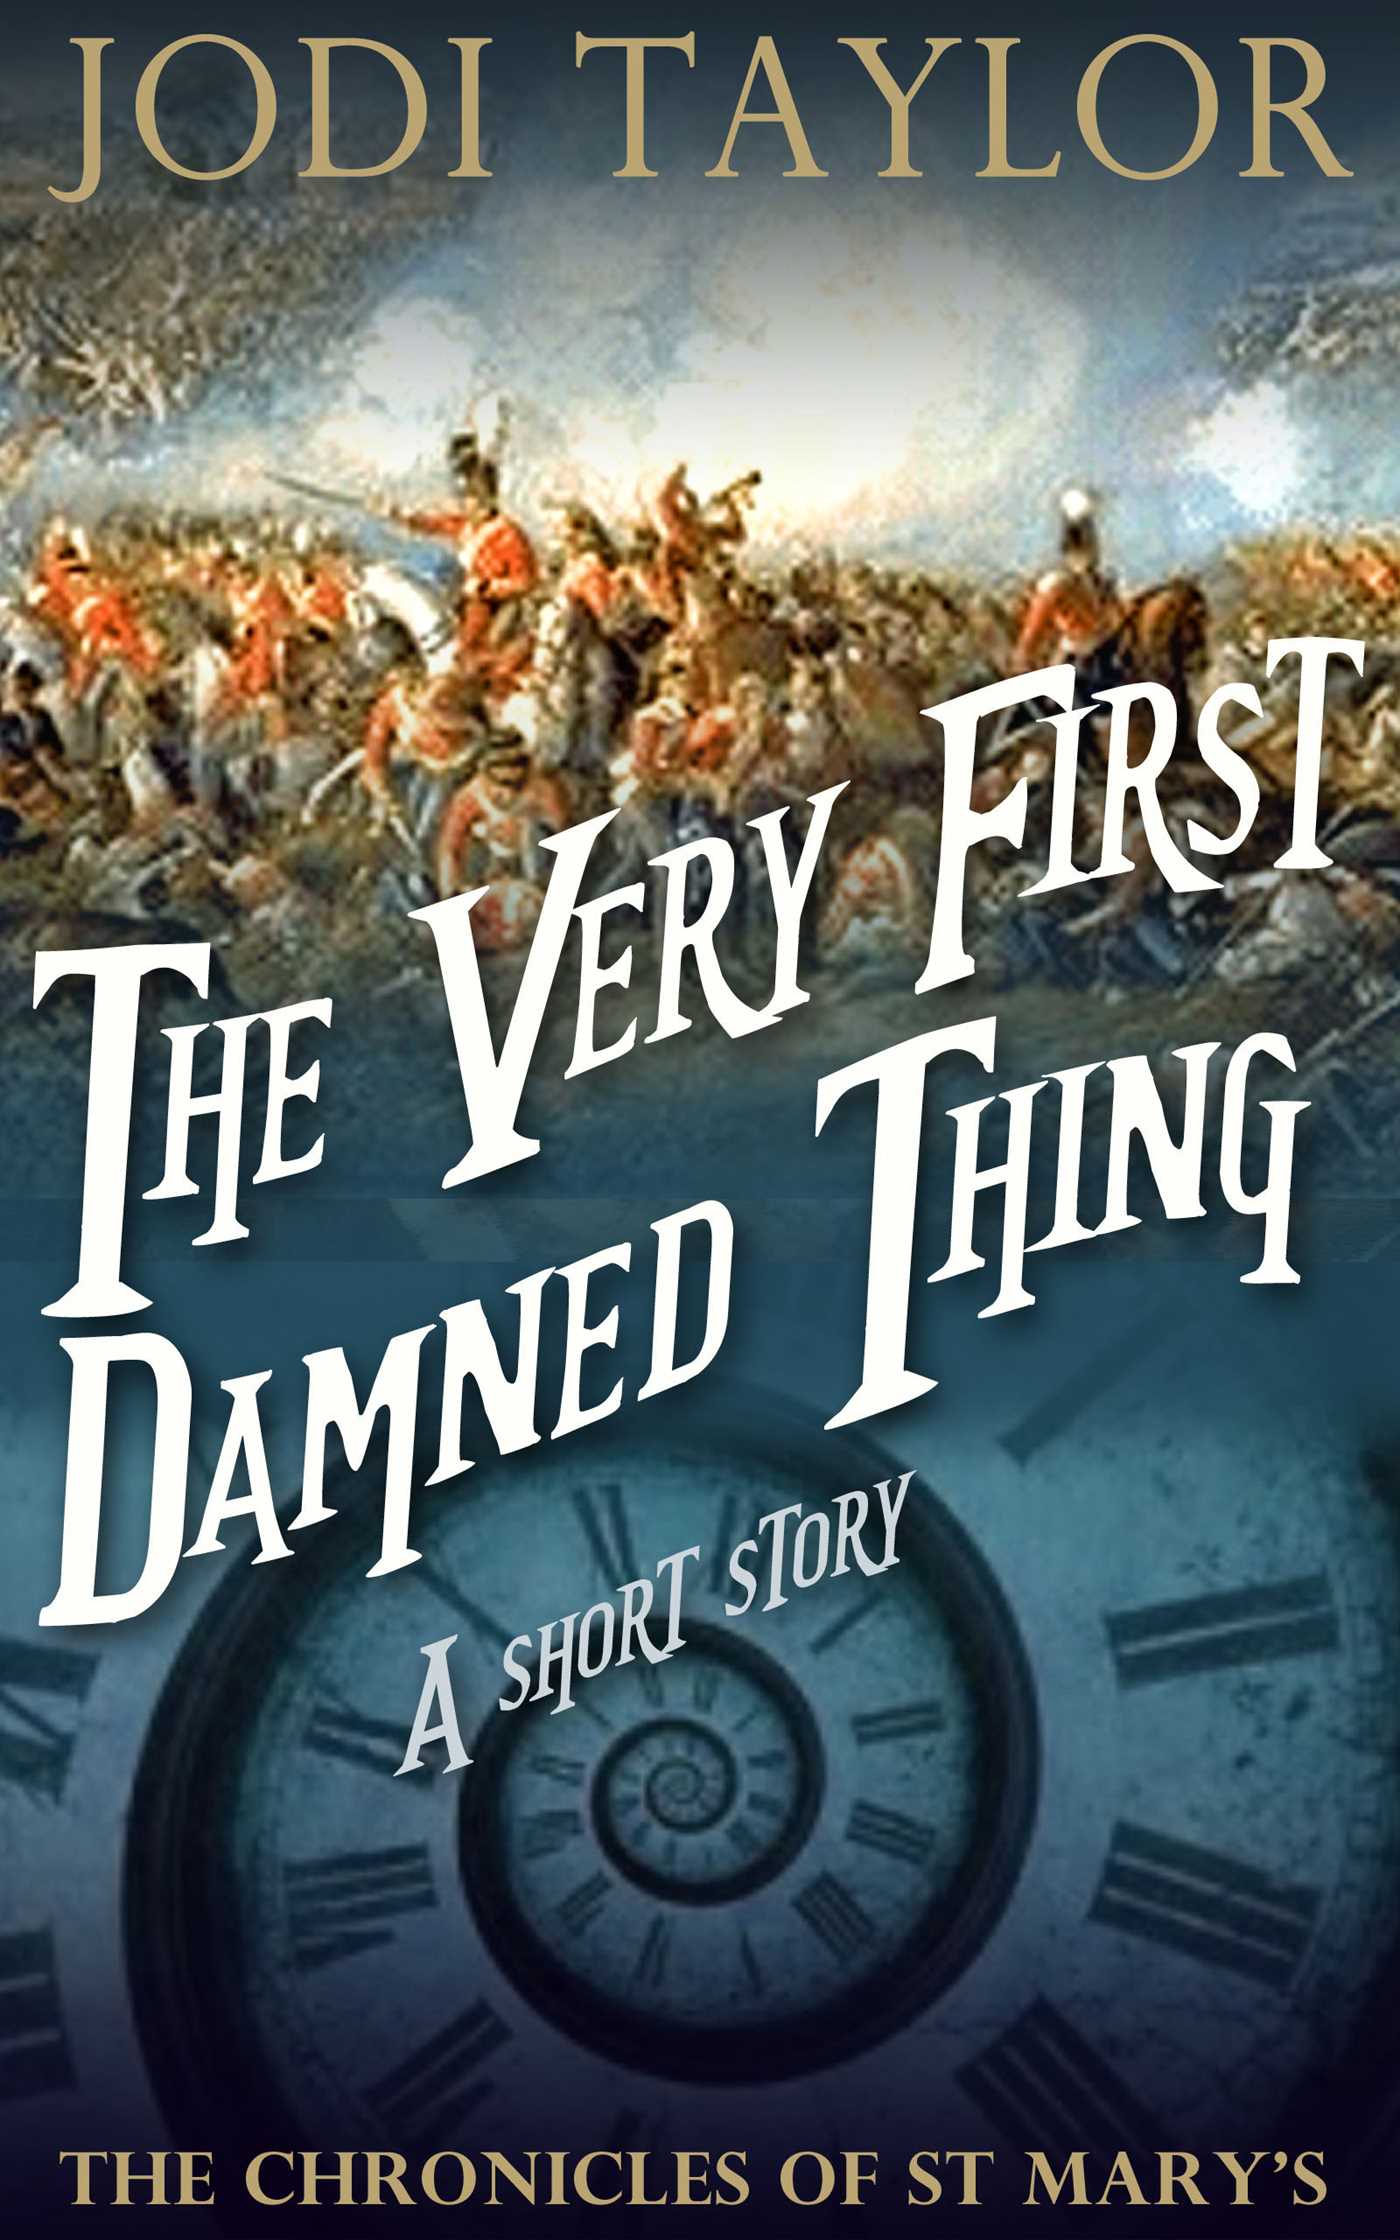 Jodi Taylor: Very First Damned Thing (EBook, 2015, Accent Press Limited)